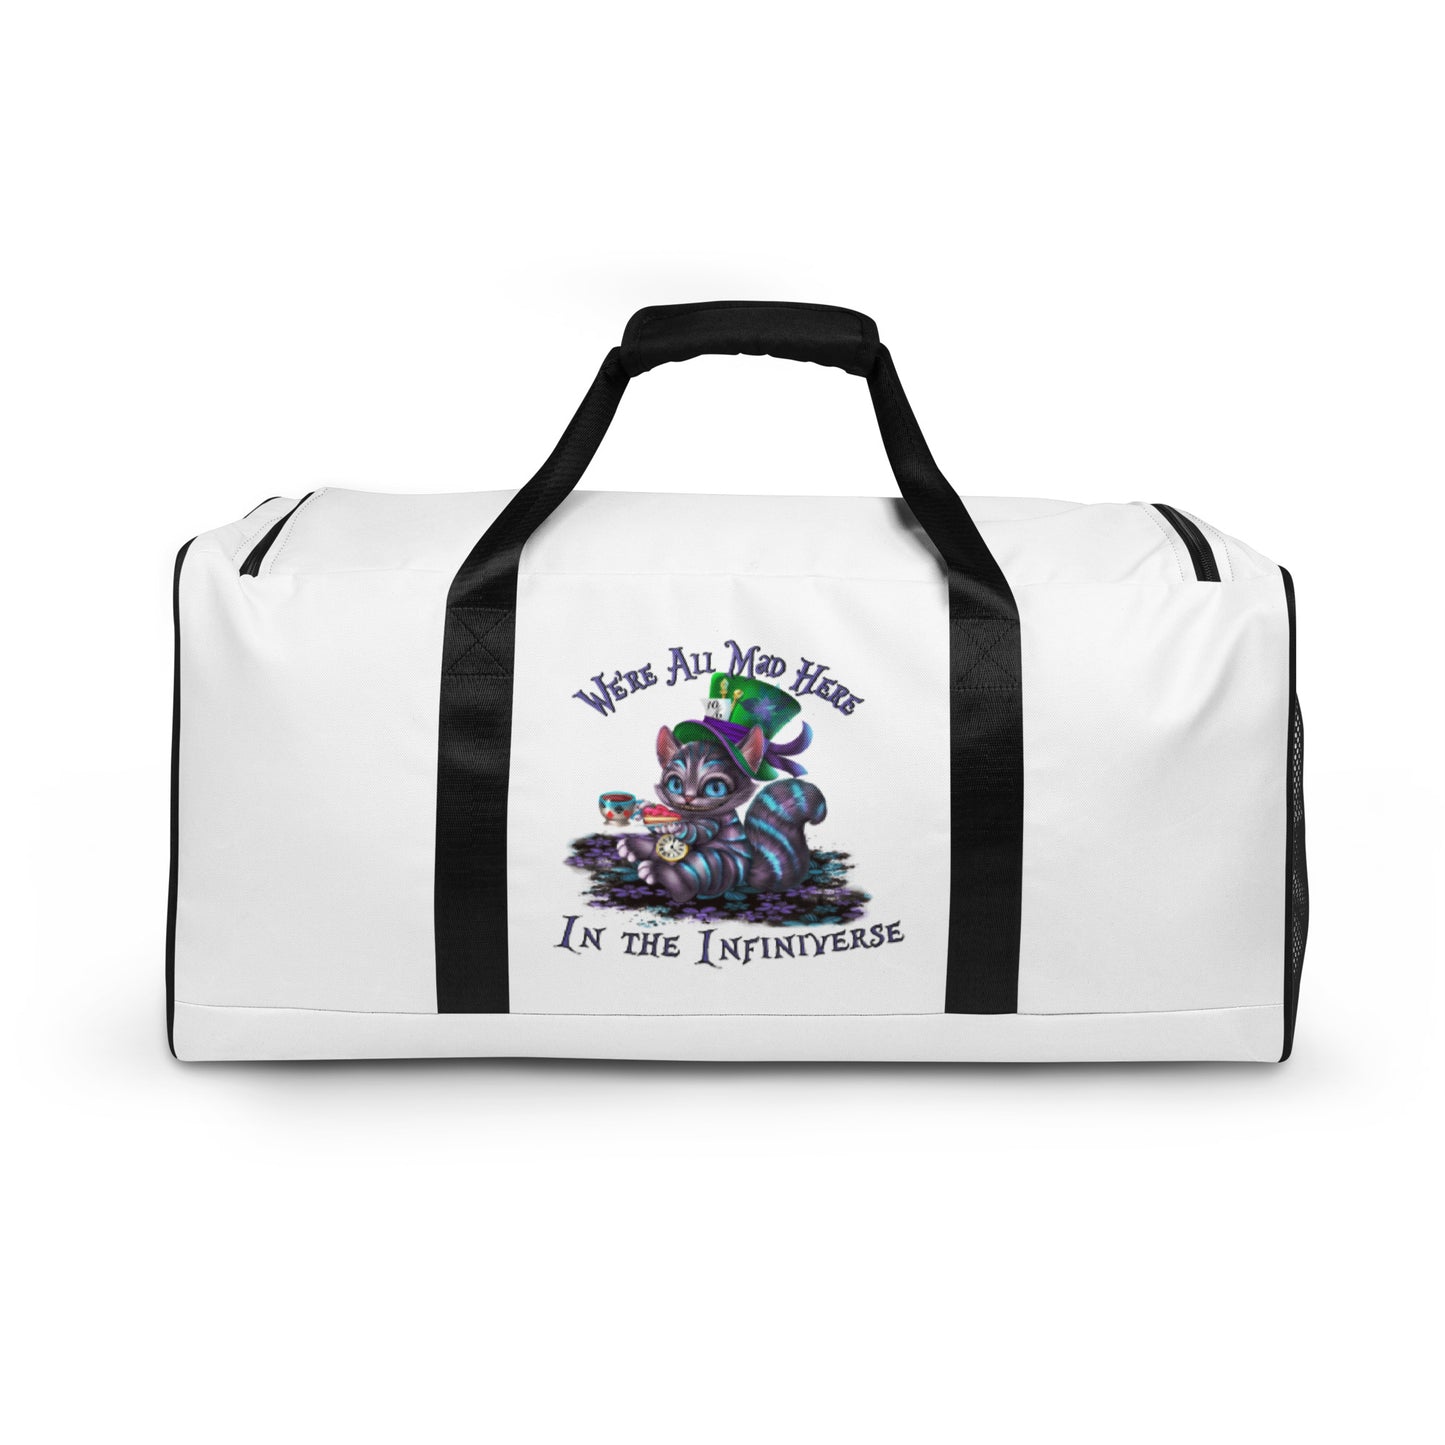 The Best Thing You Can Do Wonderland Duffle bag